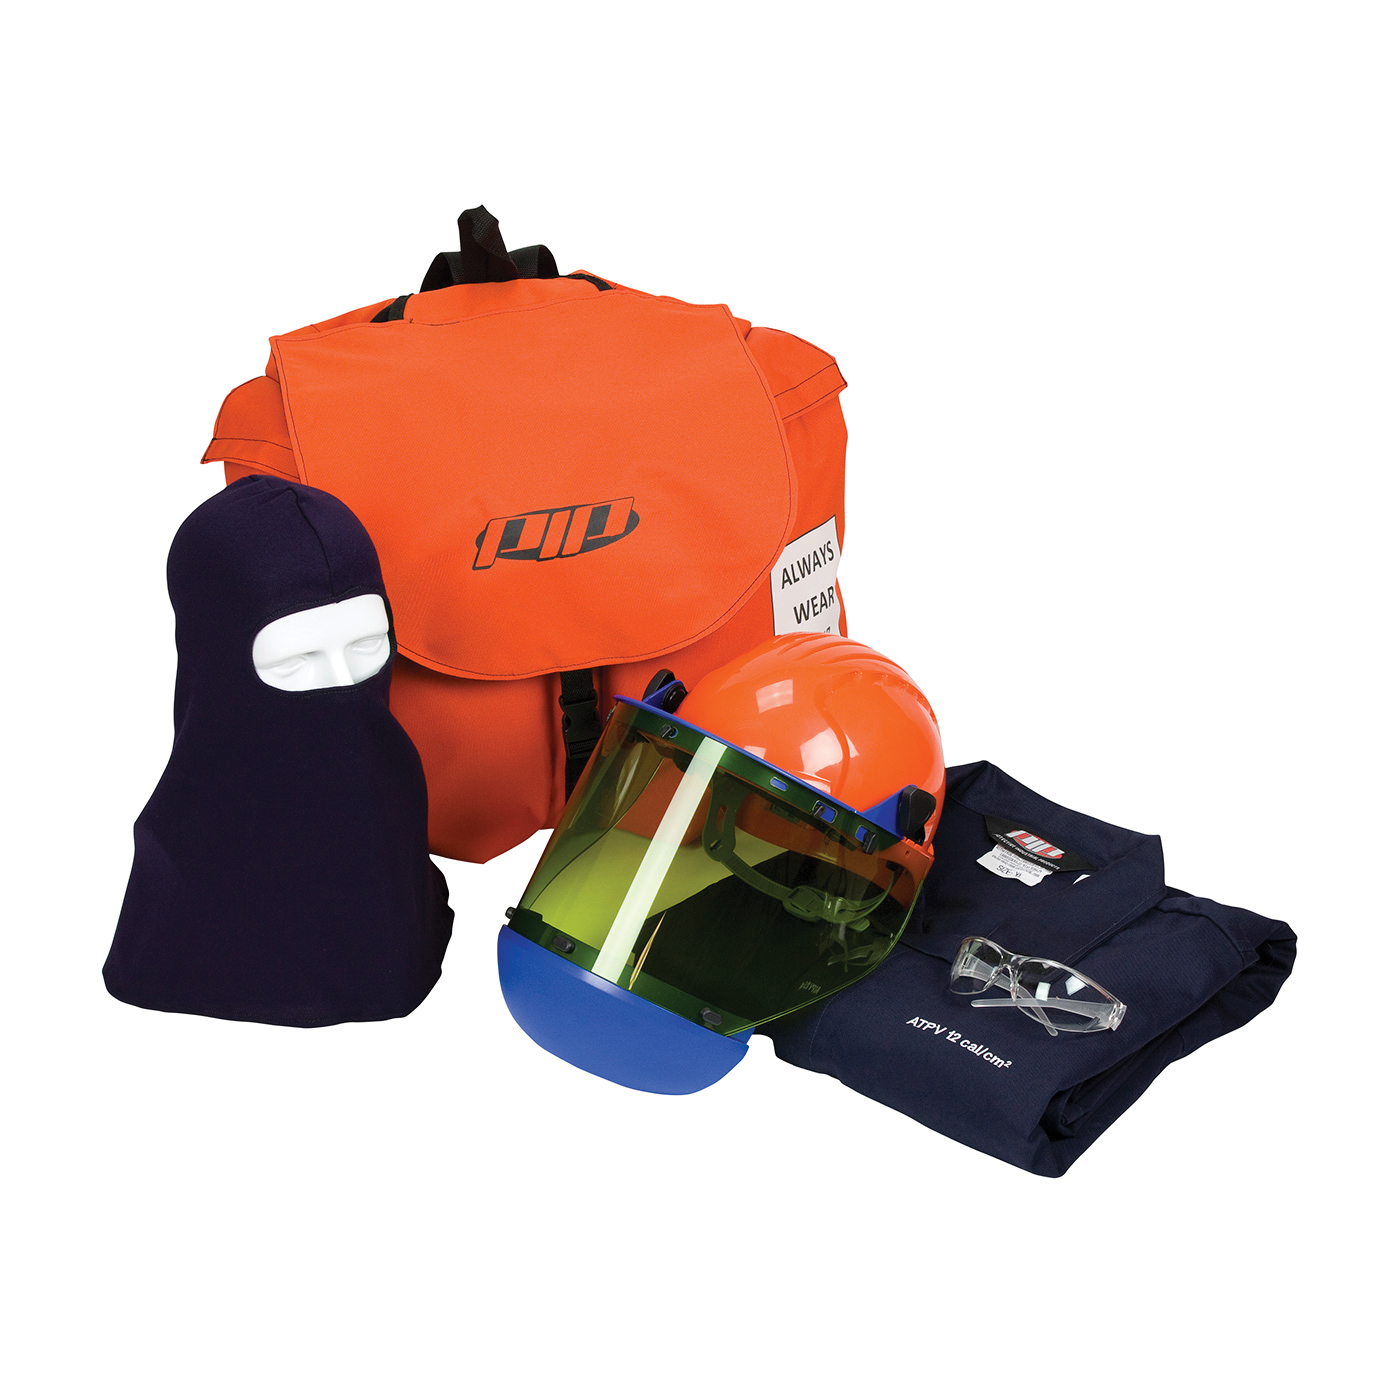 PIP® 9150-5488EB/2X Arc Flash Kit, Hazard Risk Category (HRC): 2, Hood/Face Shield Max Arc Flash Protection: 12 cal/sq-cm, Garment Max Arc Flash Protection: 12 cal/sq-cm, Specifications Met: NFPA 70E-2018, Arc Shield/Hard Hat Head/Face Protection